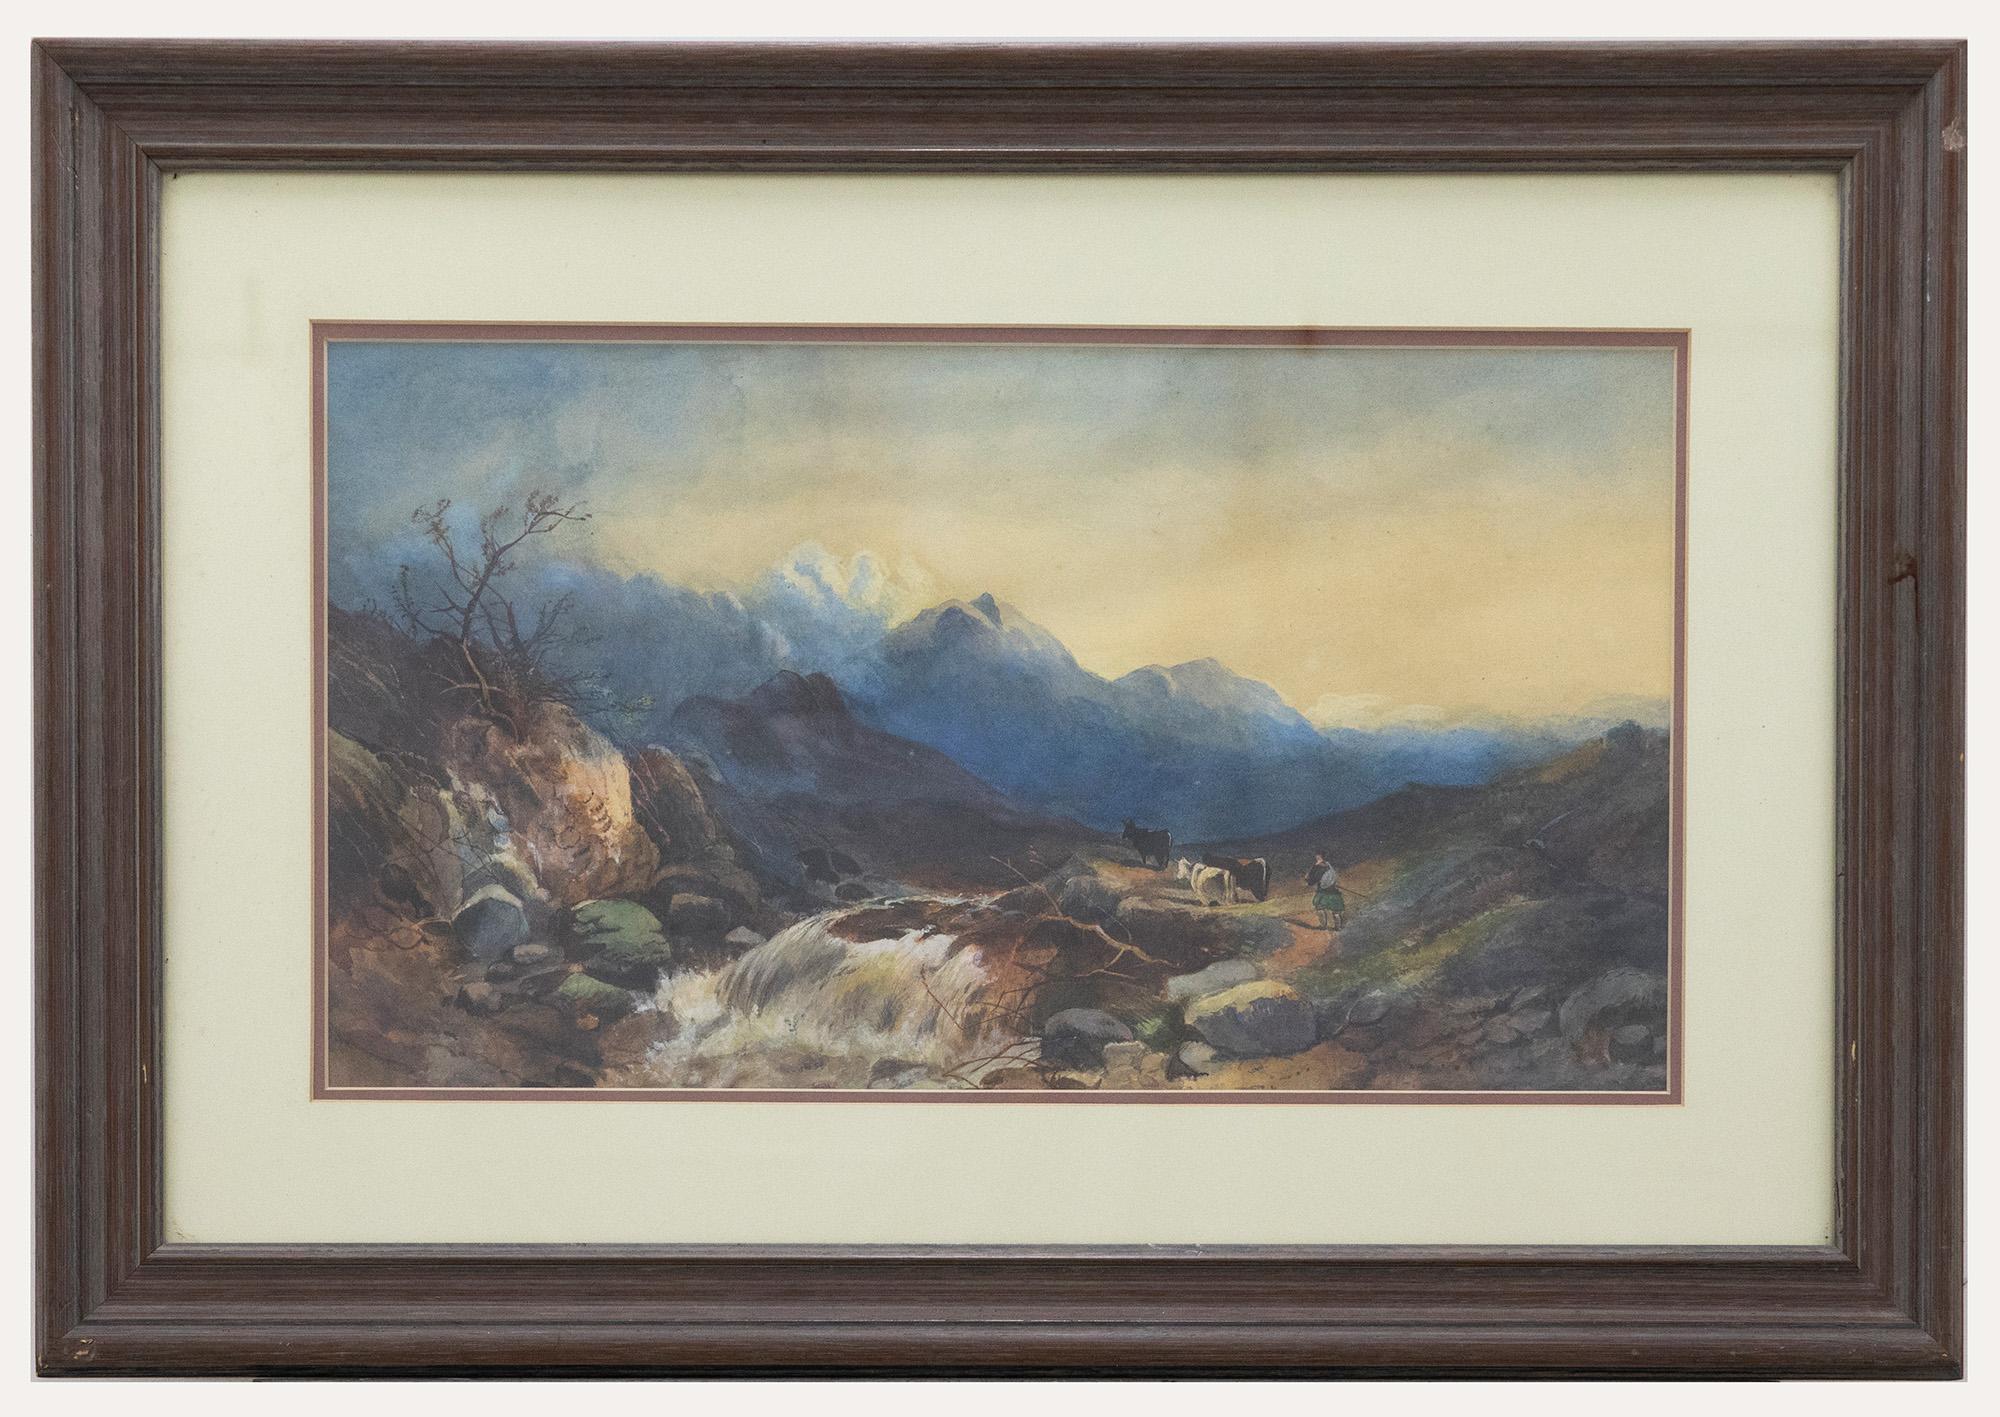 Unknown Landscape Art - Late 19th Century Watercolour - Cows by the Highland Stream